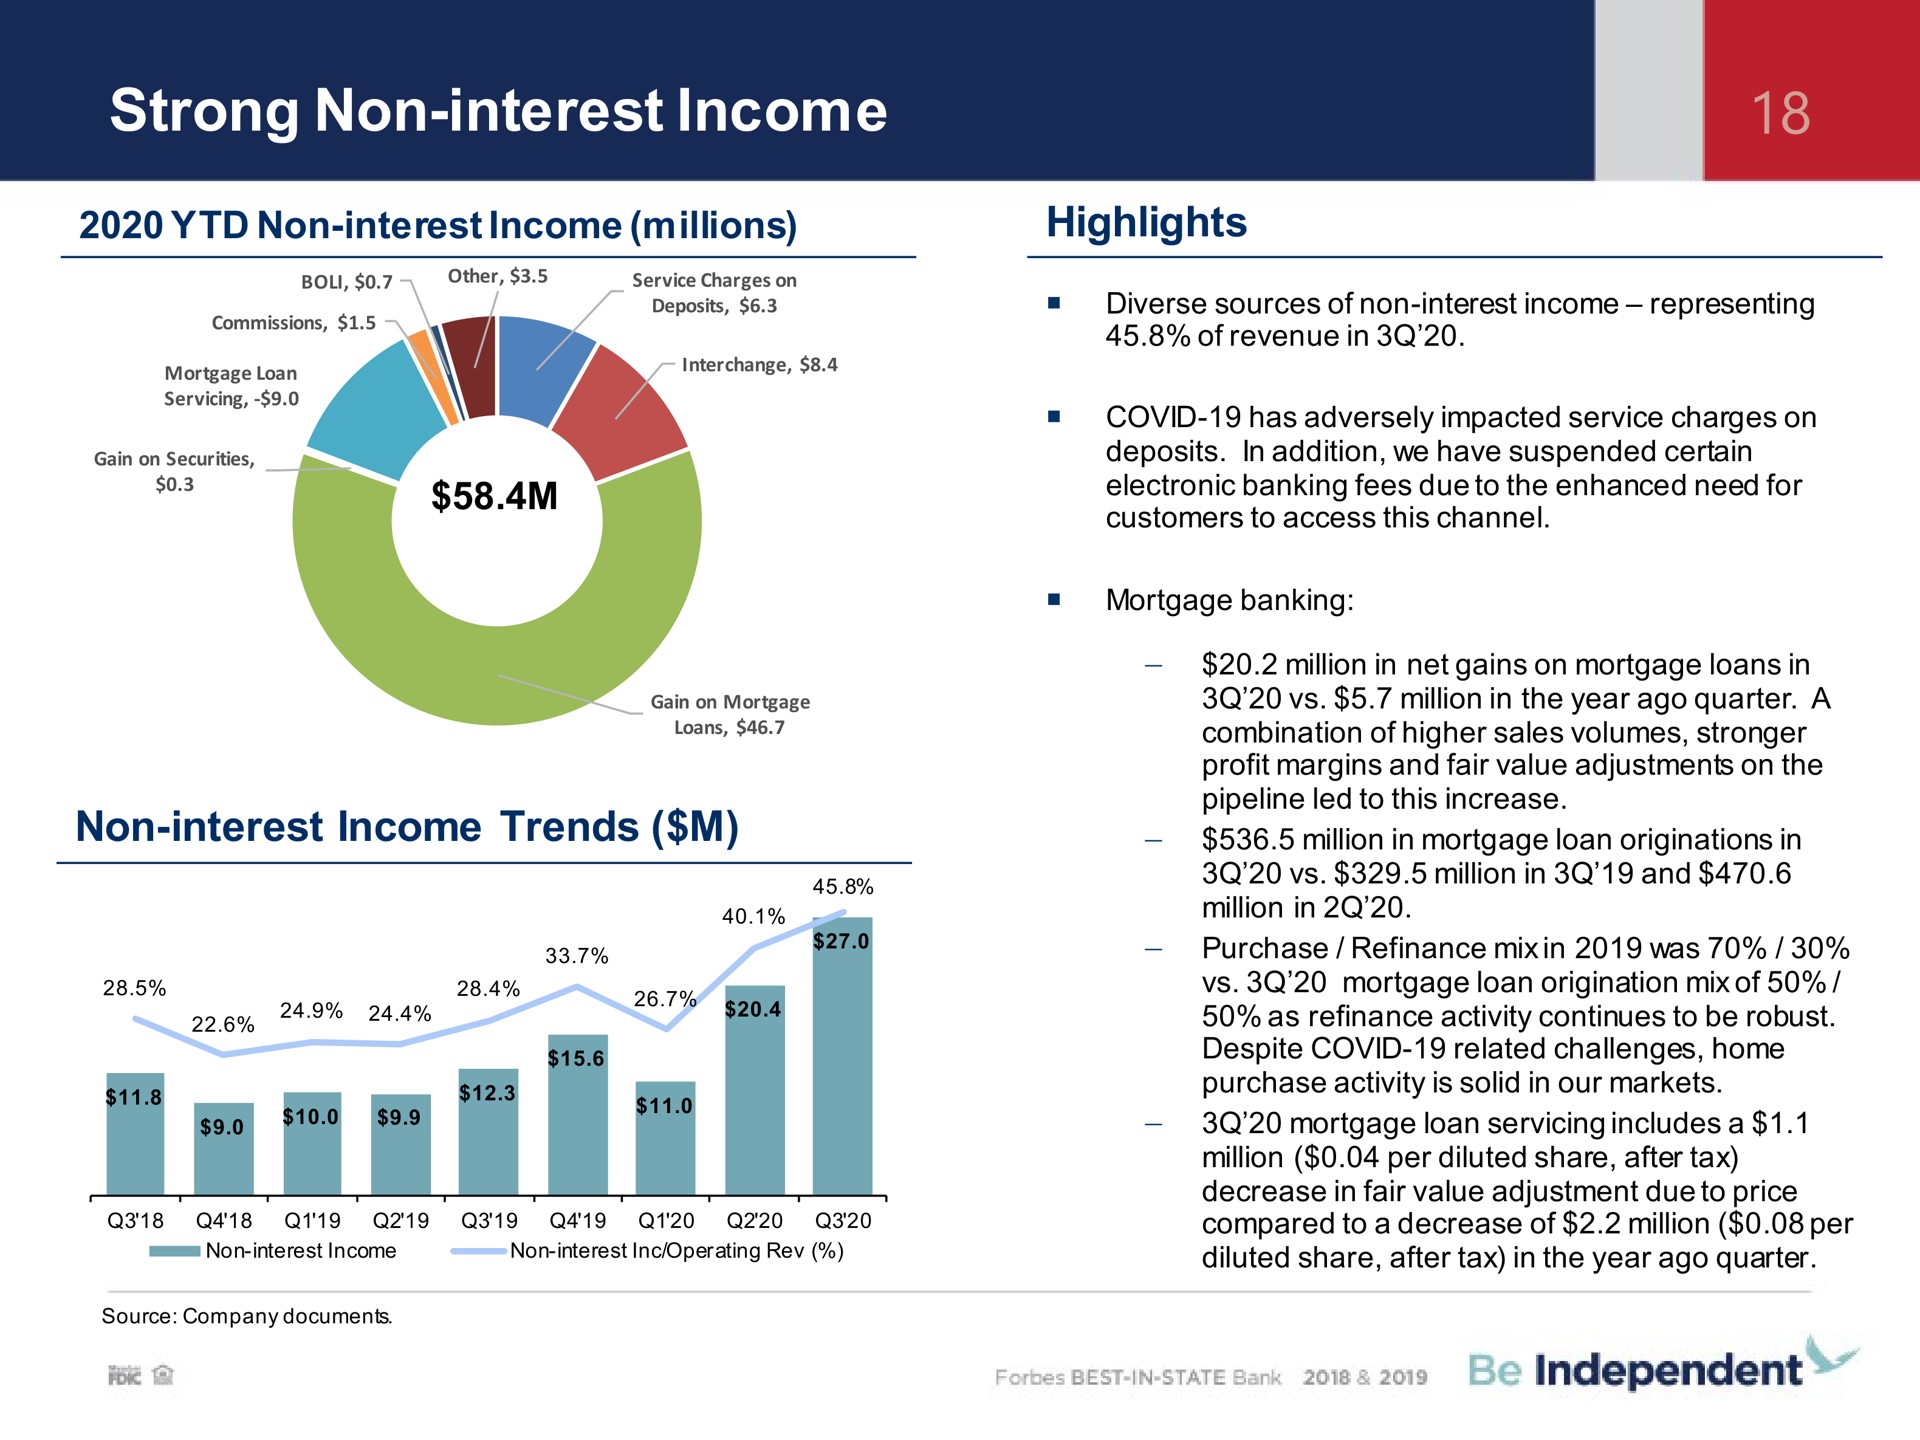 strong non interest income highlights non interest income trends | Independent Bank Corp